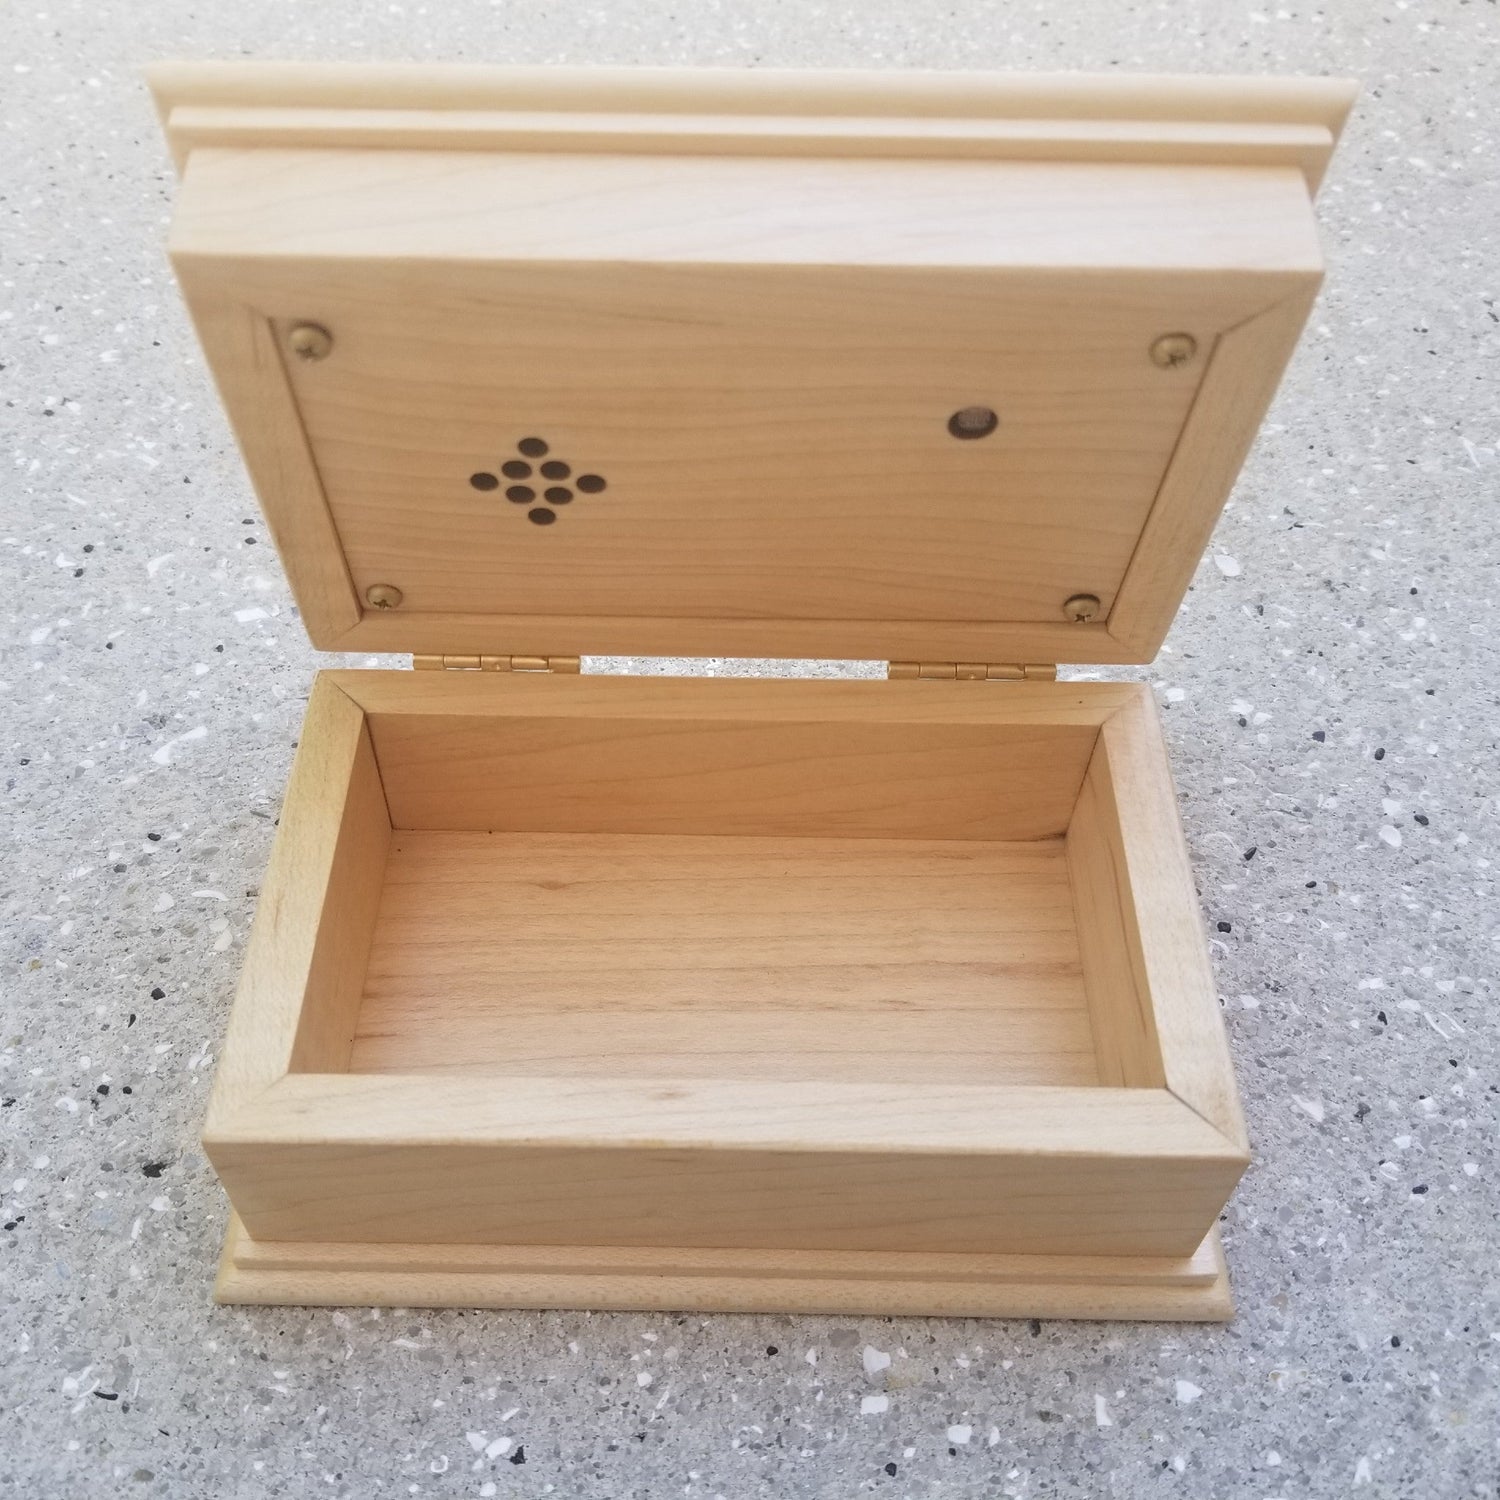 jewelry box with open lid showing light sensor and speaker for music player built in under lid